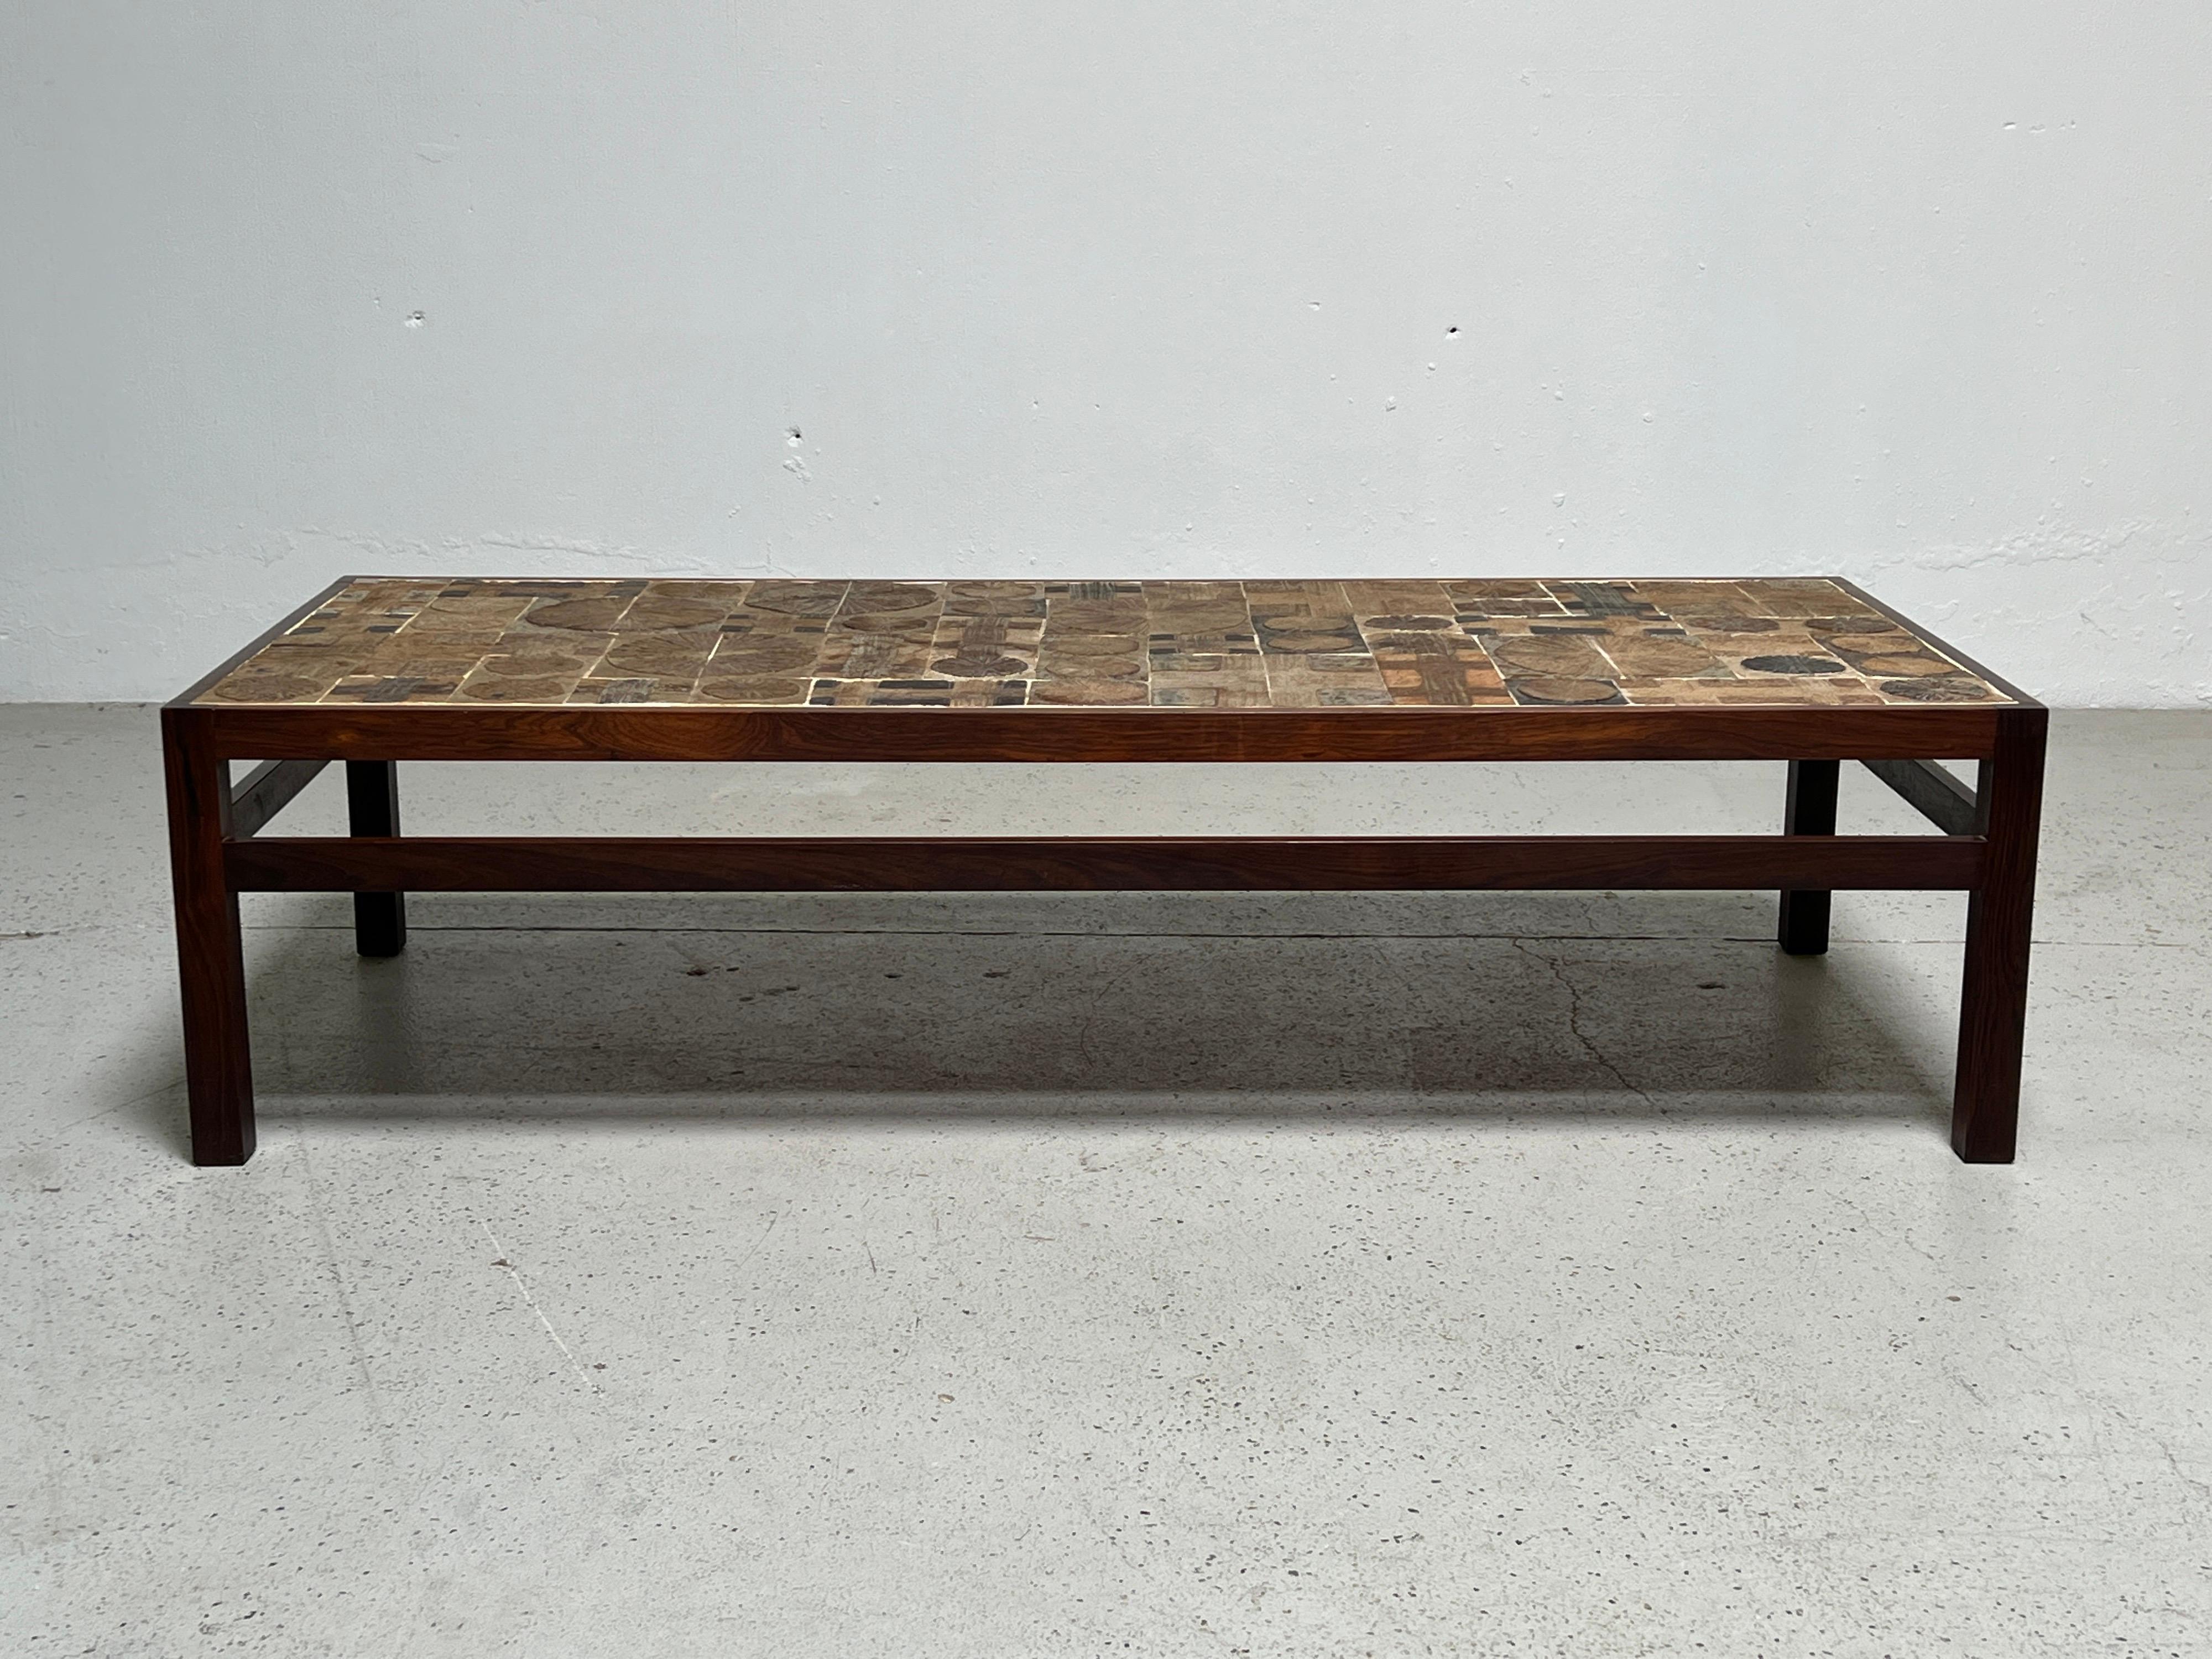 A large rosewood and ceramic tile top table by Tue Poulsen & Erik Wørtz for Willy Beck.